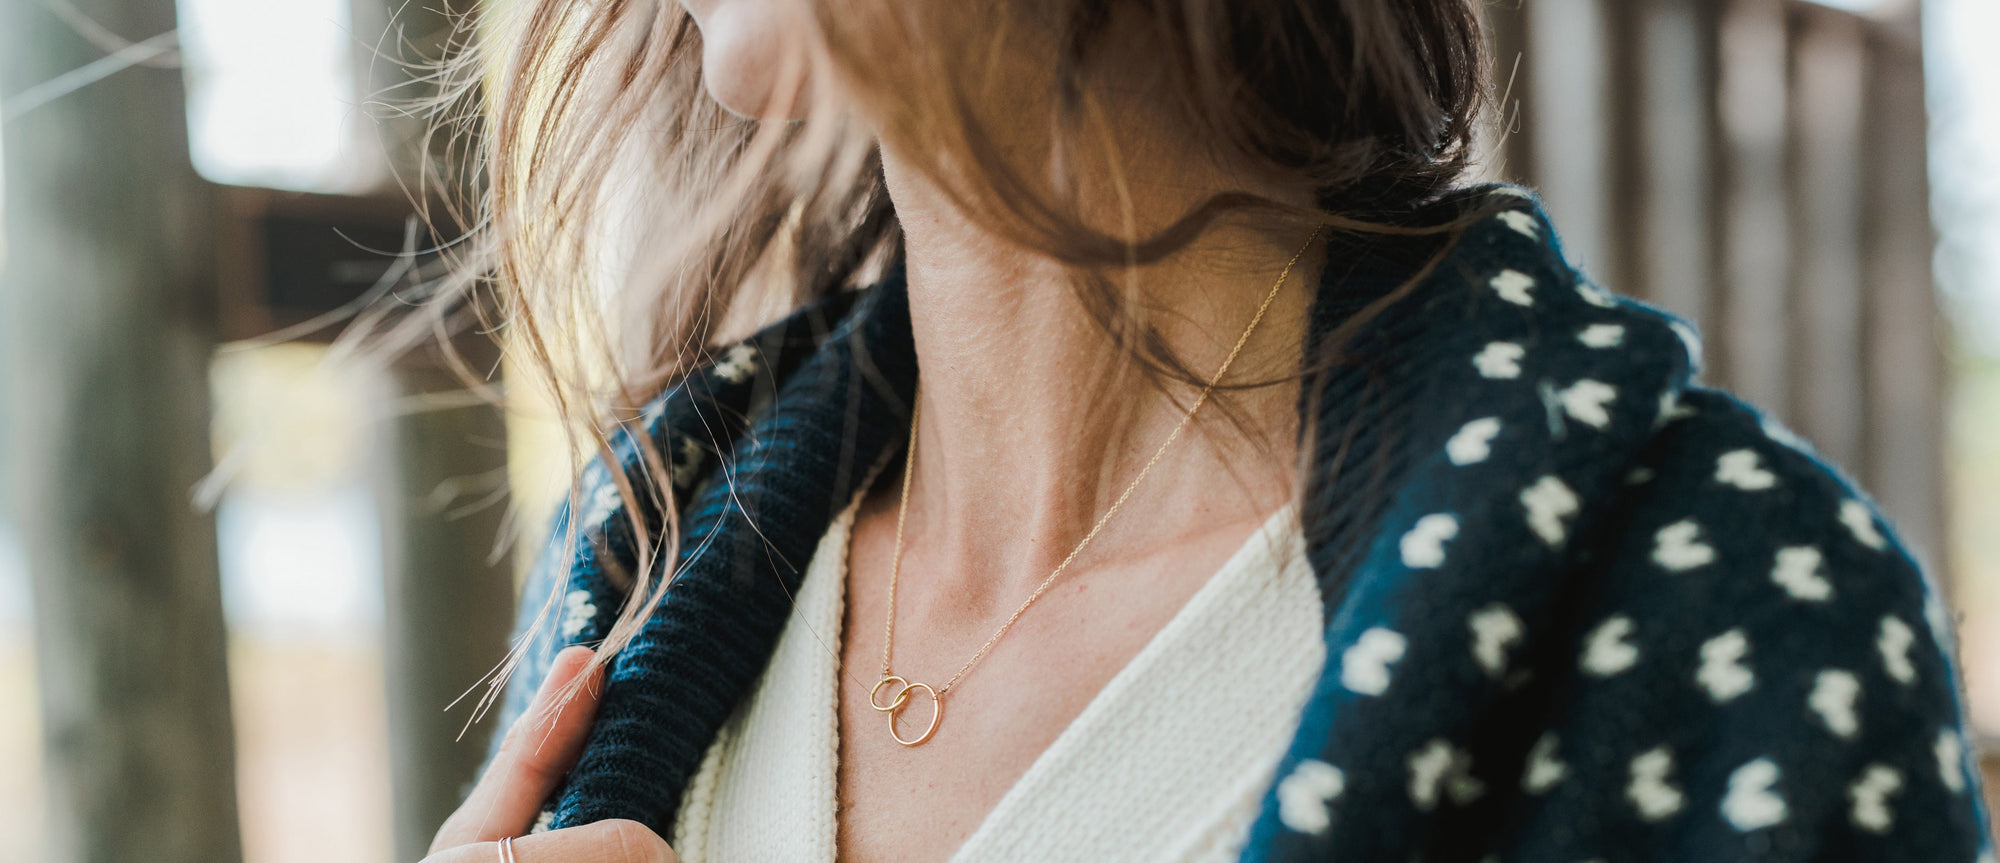 Featured image at the top of Becoming Jewelry's website featuring a woman wearing a necklace and blanket around her shoulders.